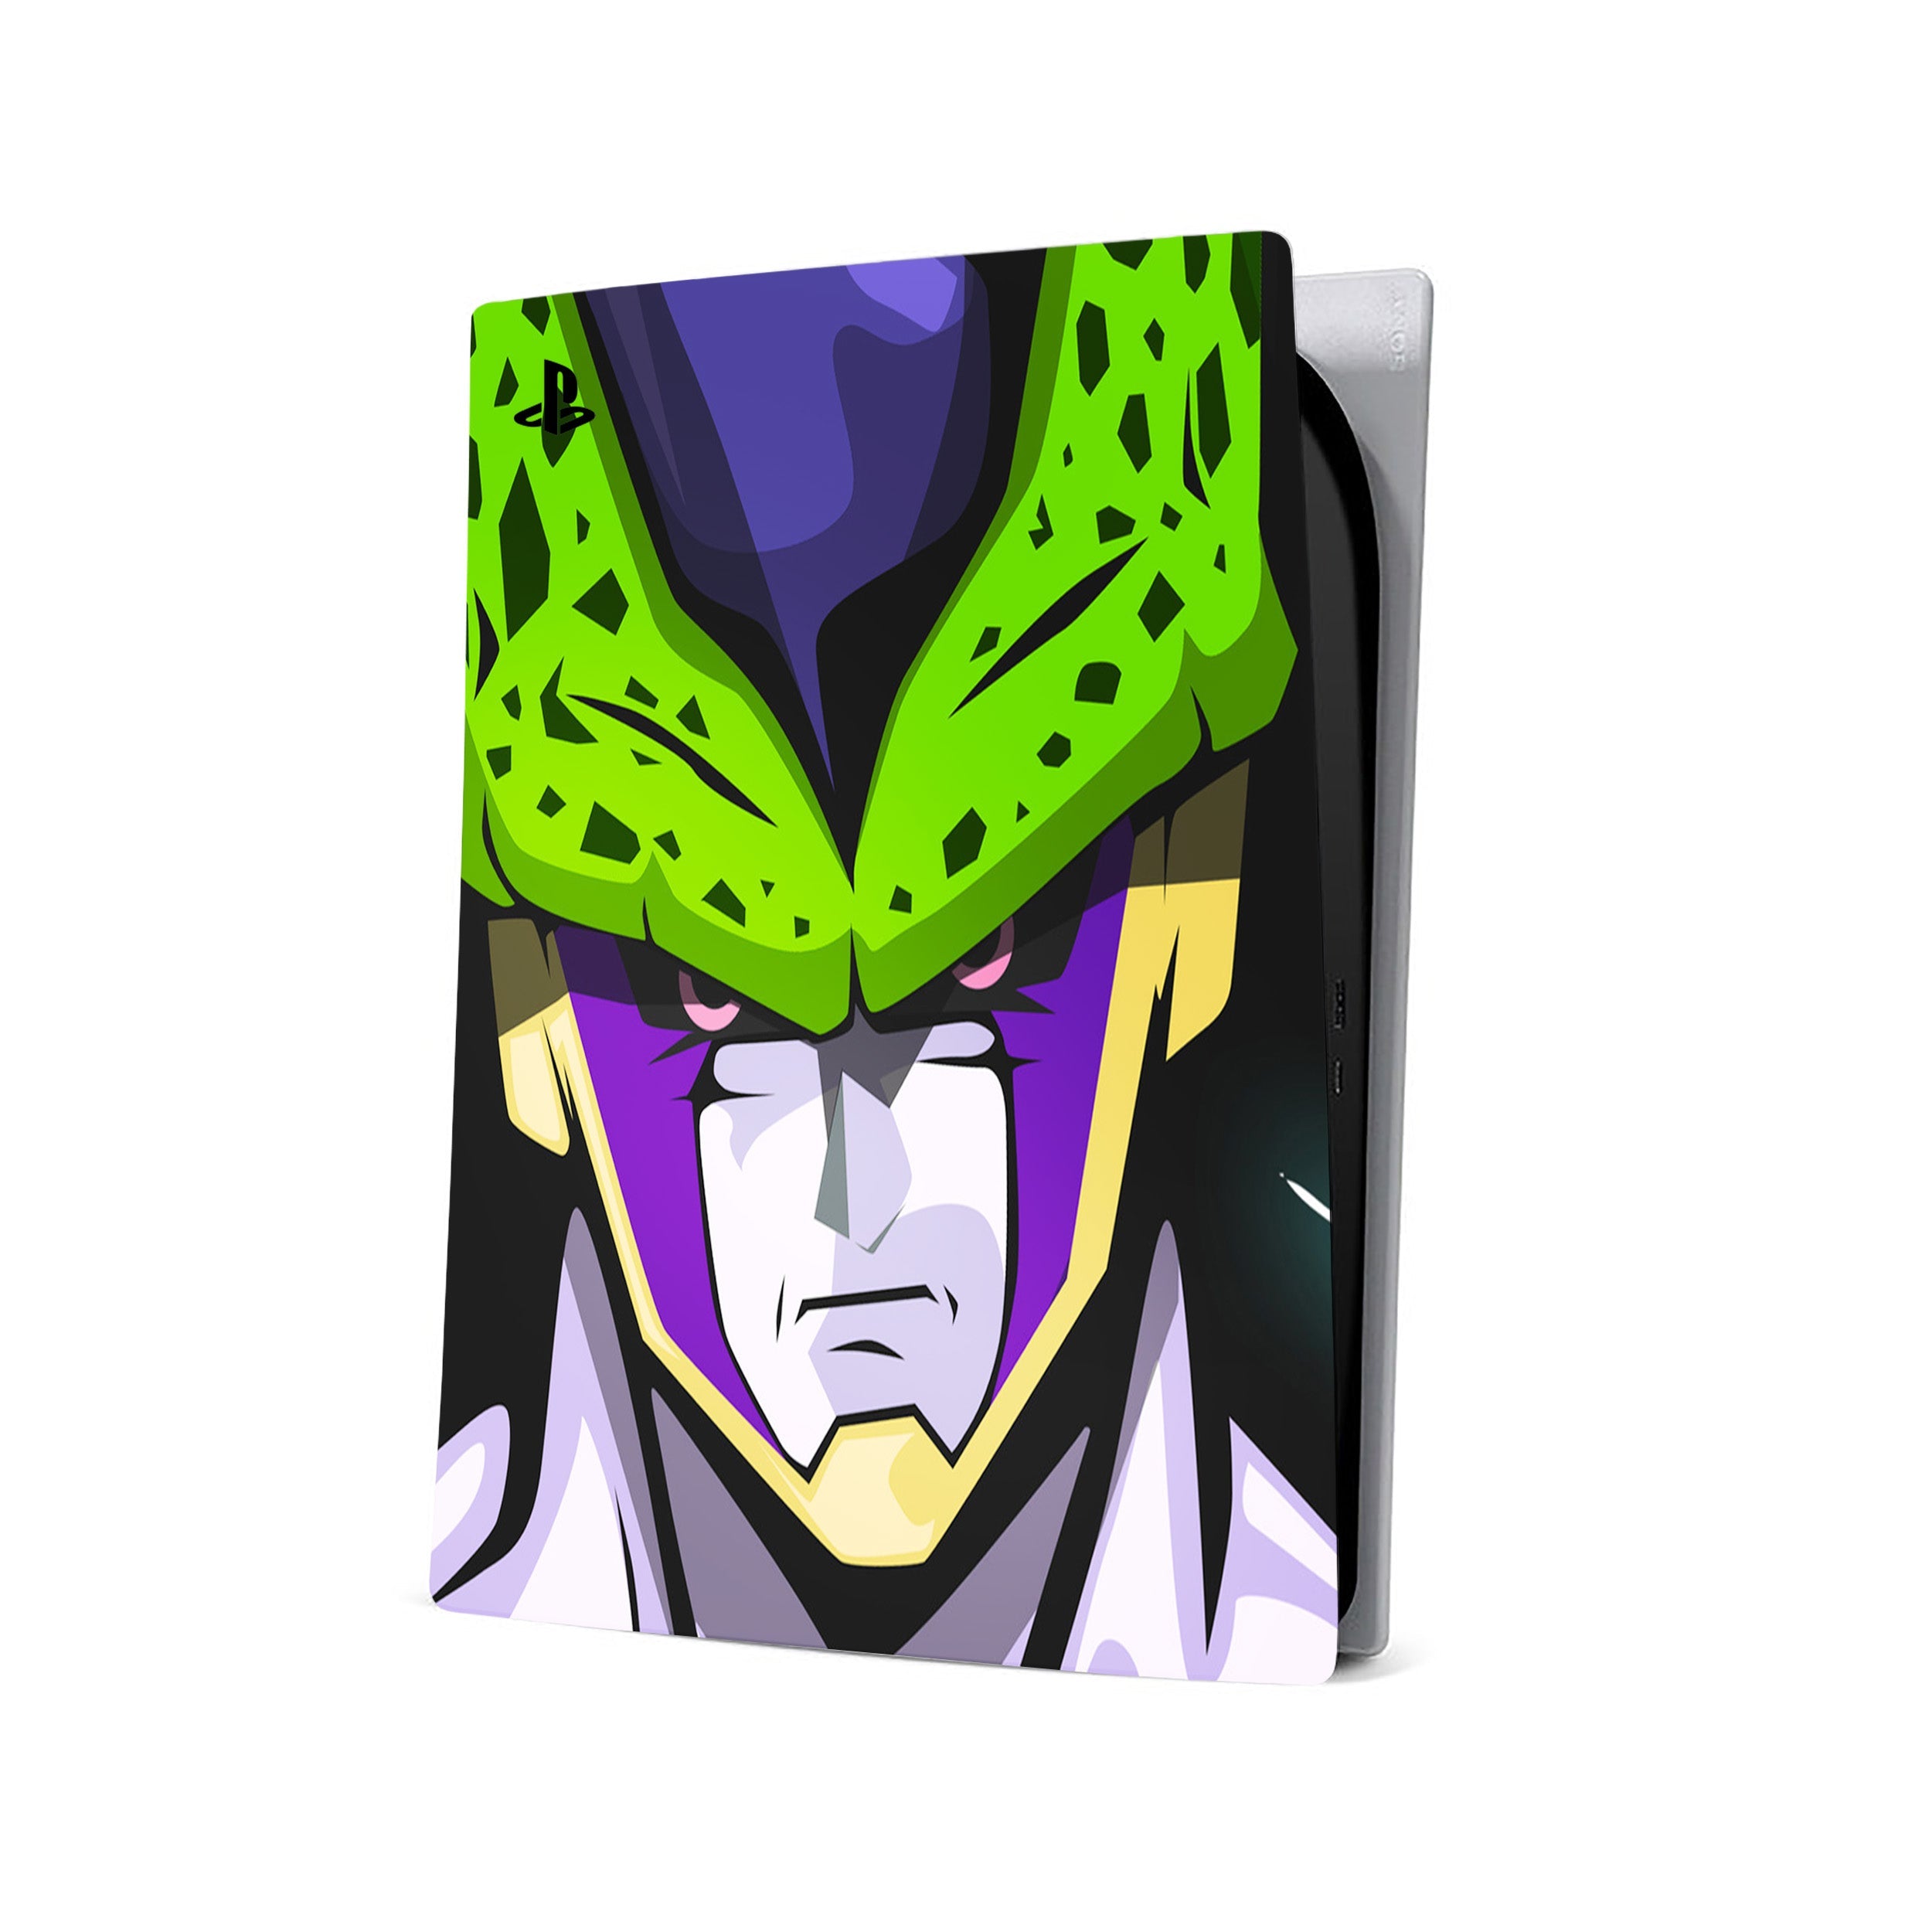 A video game skin featuring a Dragon Ball Z Cell design for the PS5.